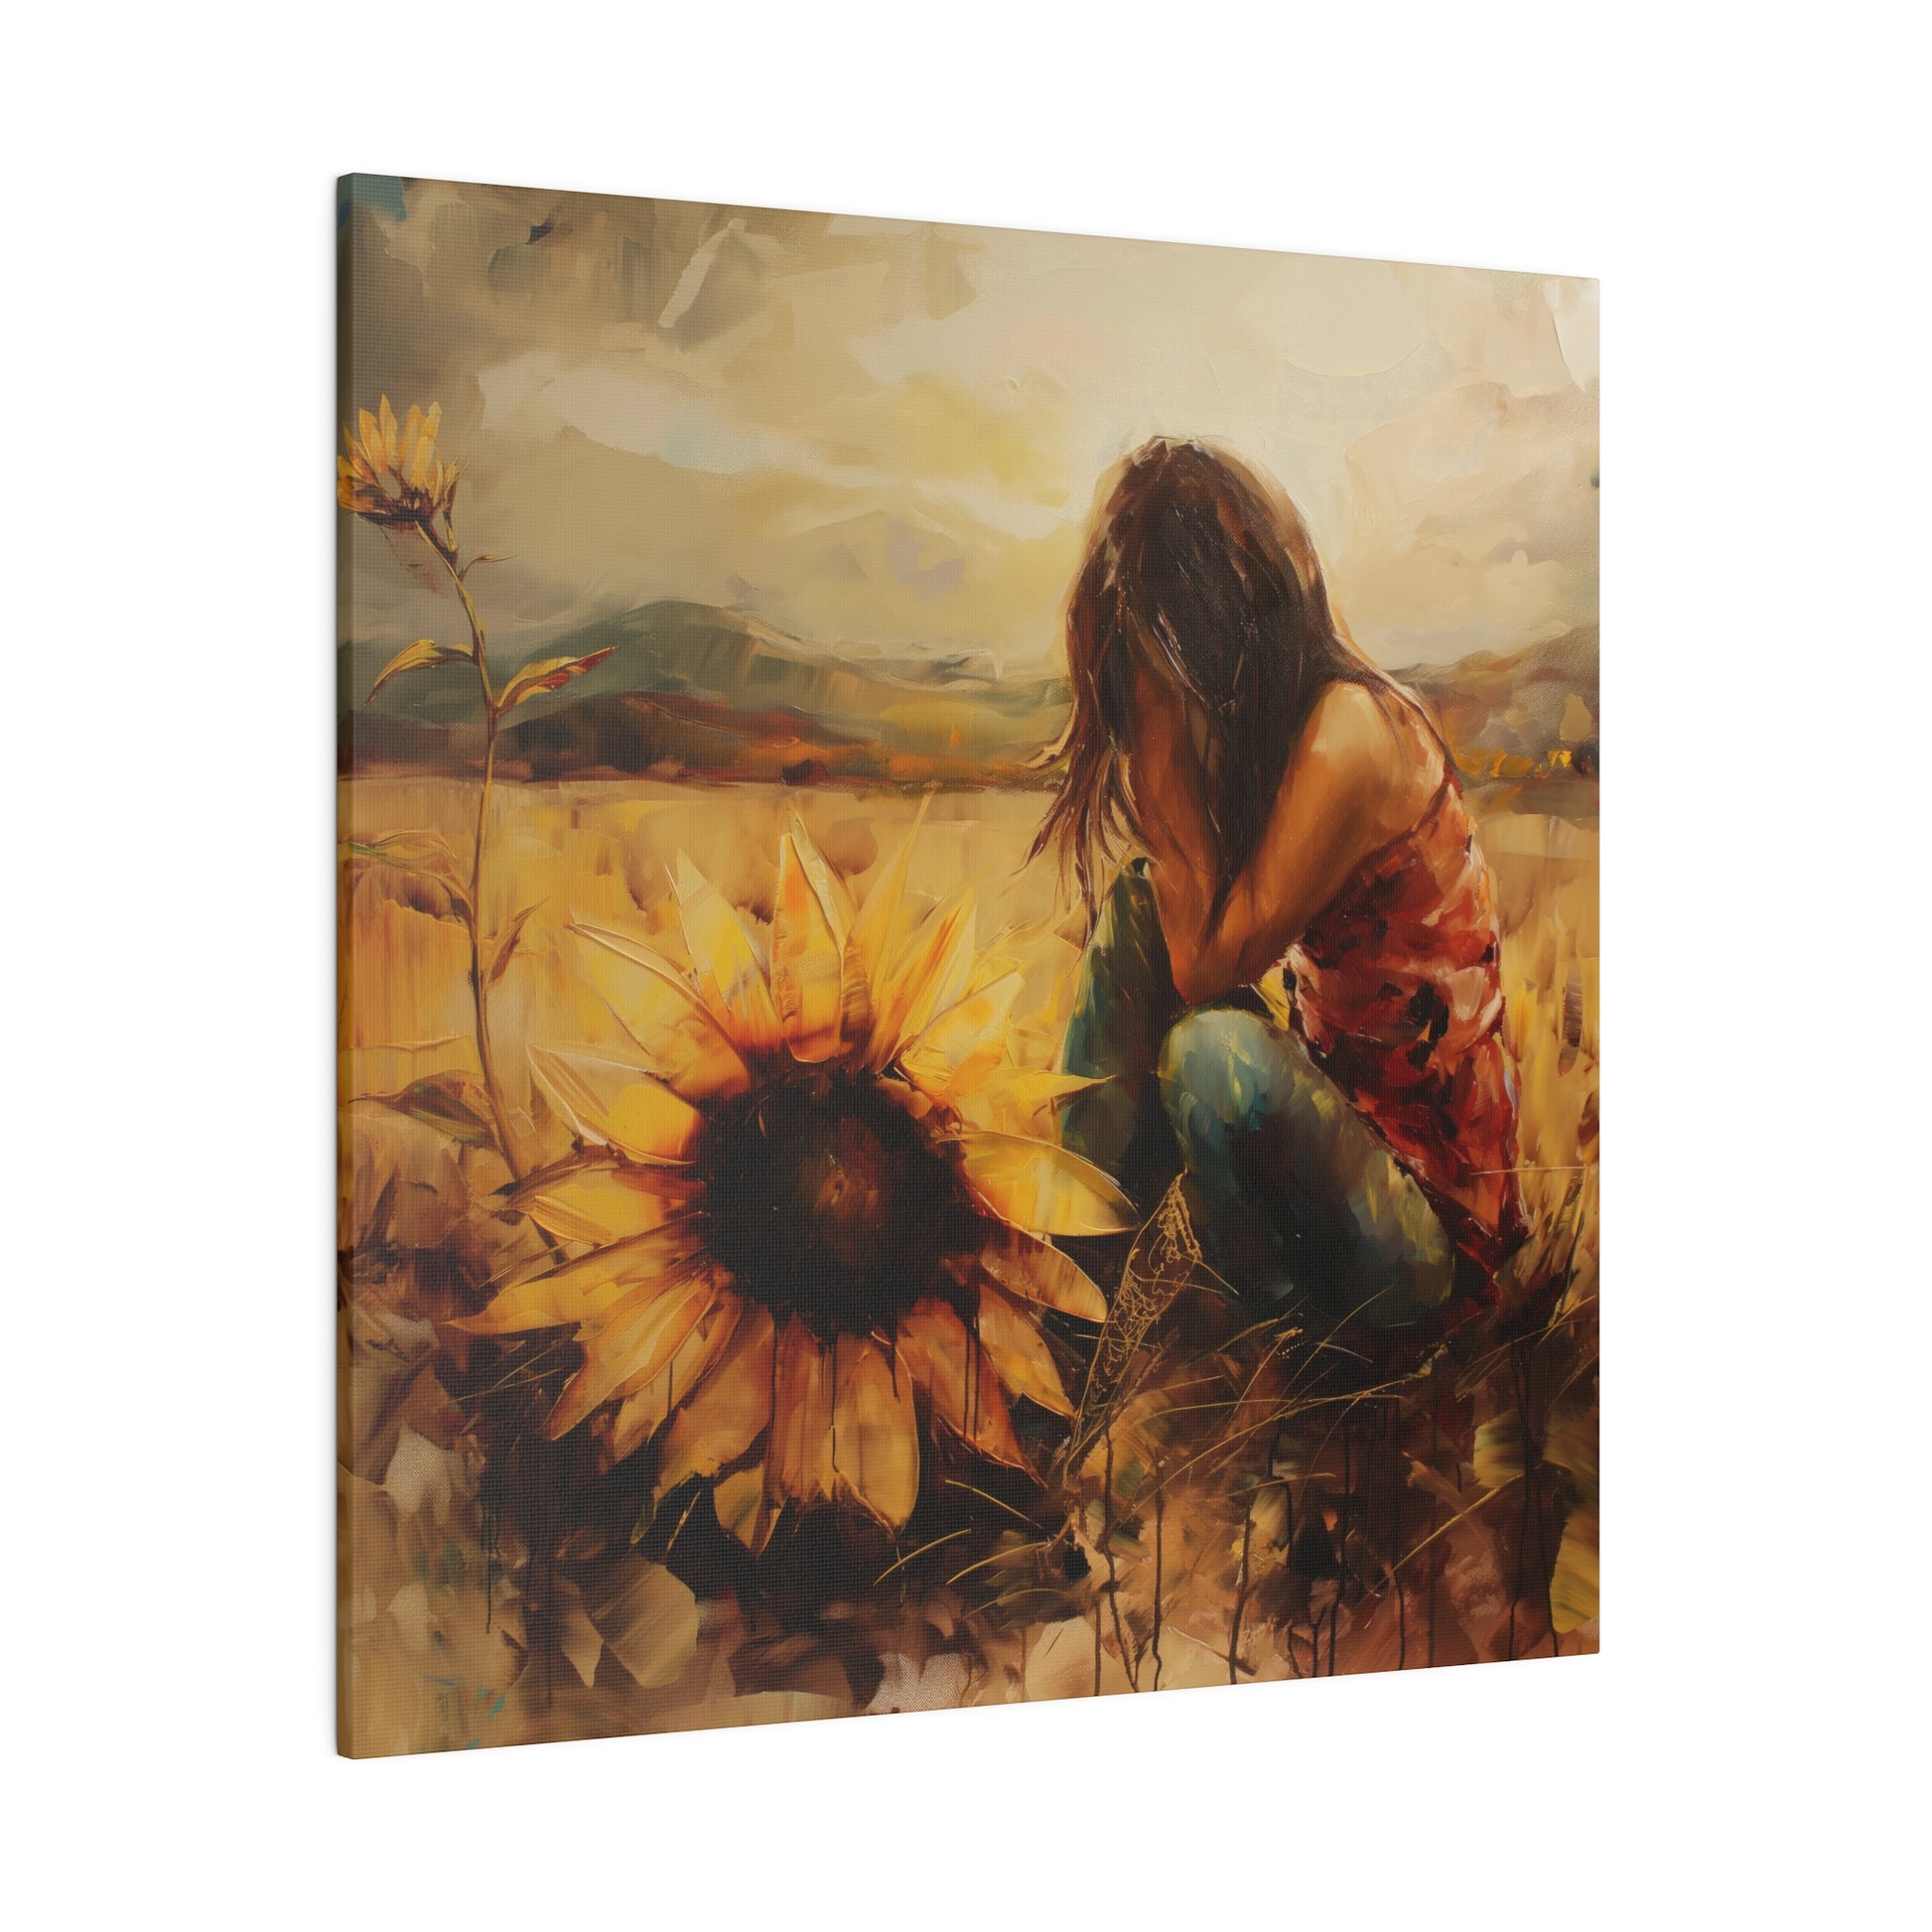 A Elena Duval: Solace in Solitude. Exclusive Canvas Print emotively captures the human experience of a woman sitting among large sunflowers, symbolizing growth and adoration, available from Printify.